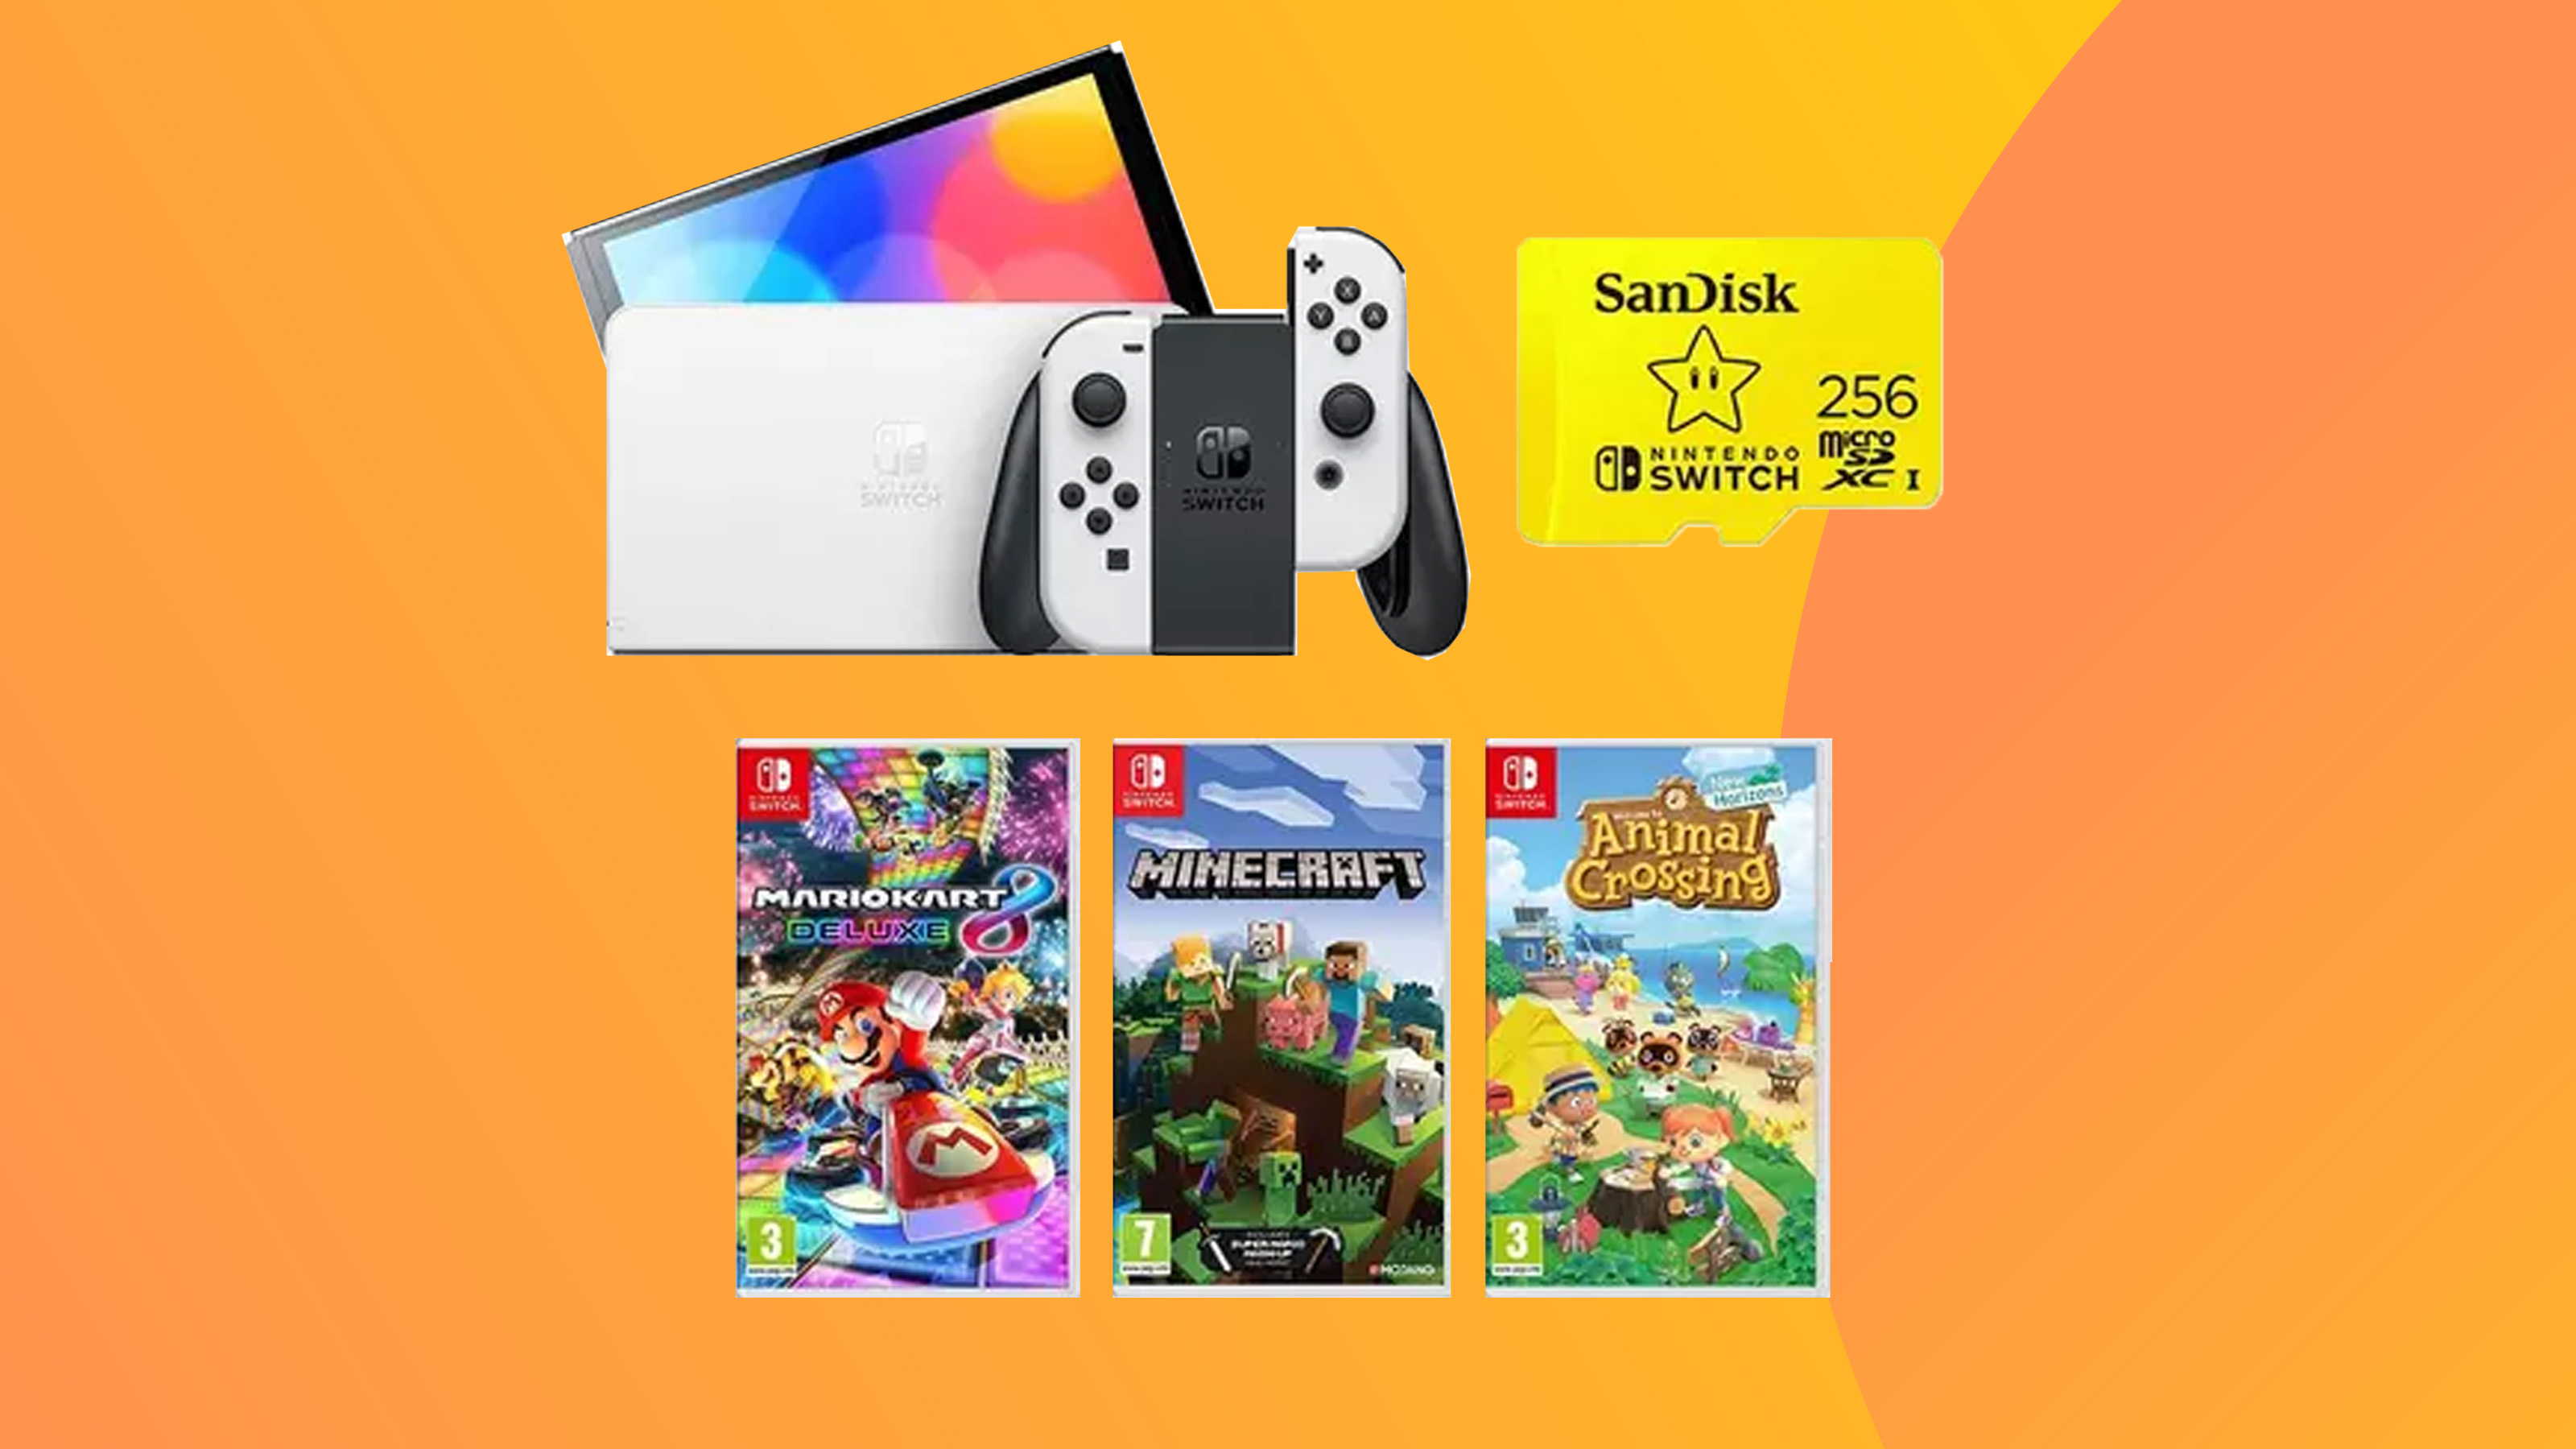 A product shot of the Nintendo Switch OLED bundle against a colorful background